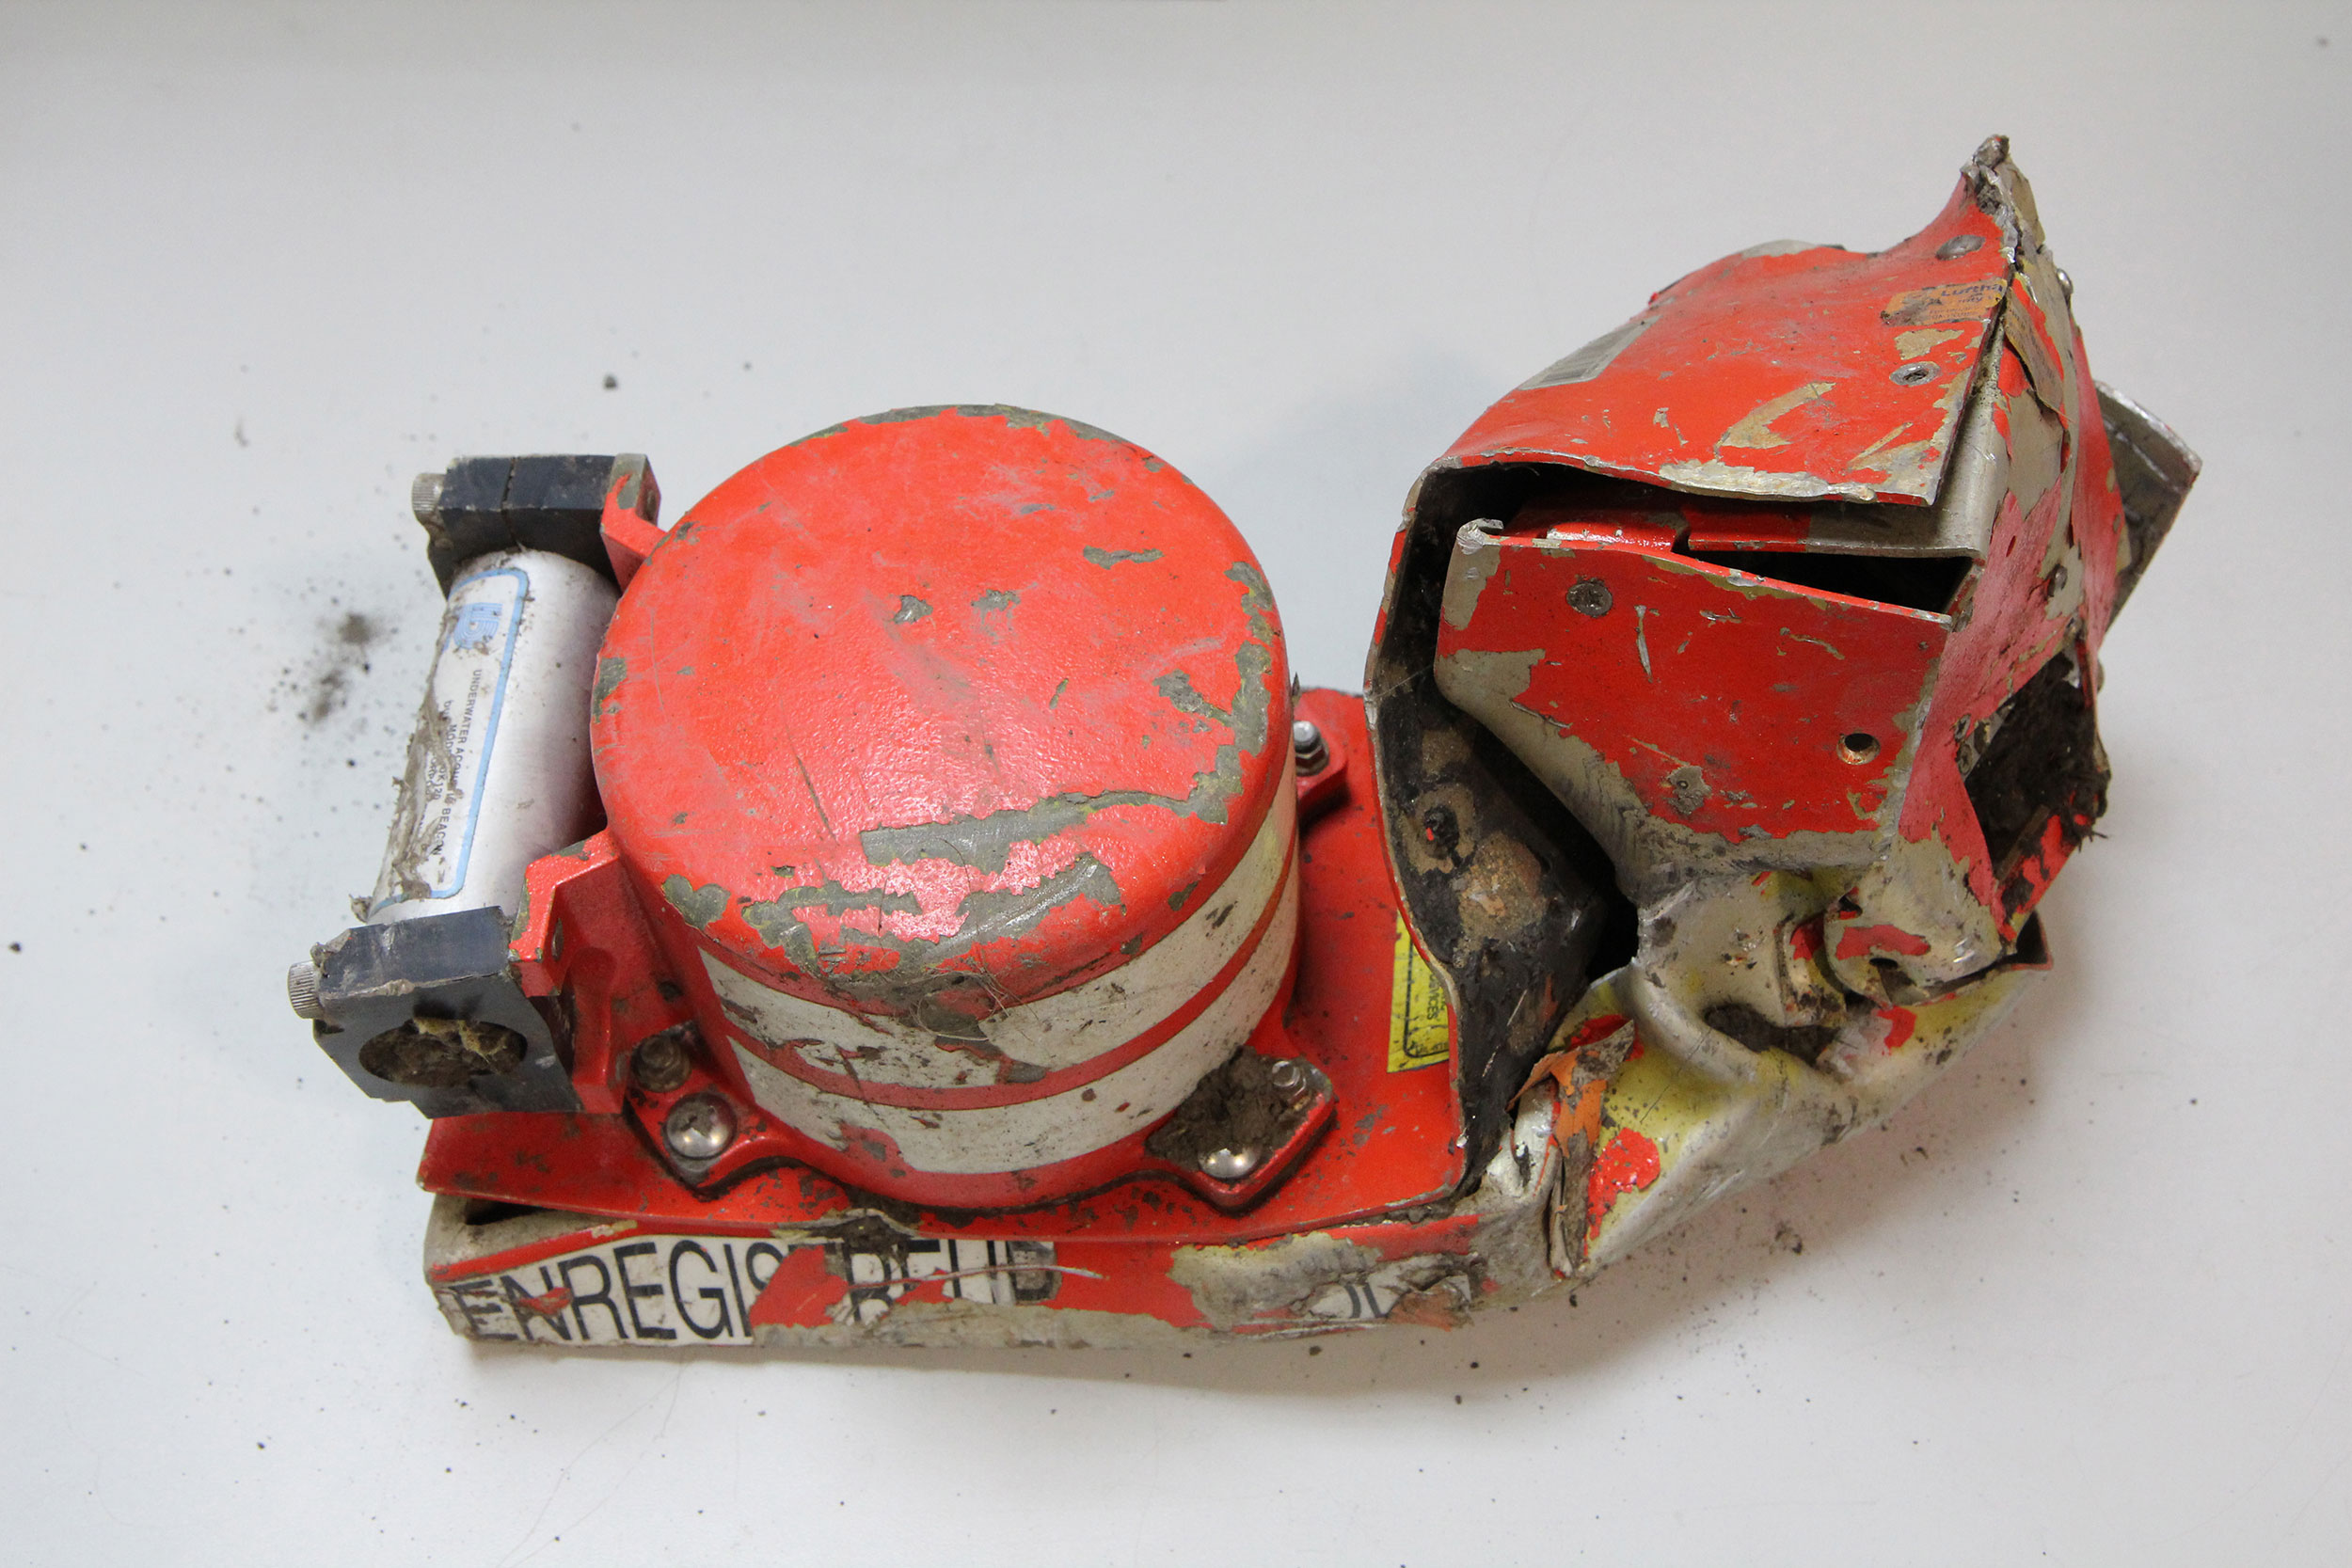 A handout picture made available by the French Aviation Authority BEA on March 25, 2015 shows the cockpit voice recorder (CVP) from the Germanwings A320 airplane that crashed in the French Alps on March 24, 2015.
